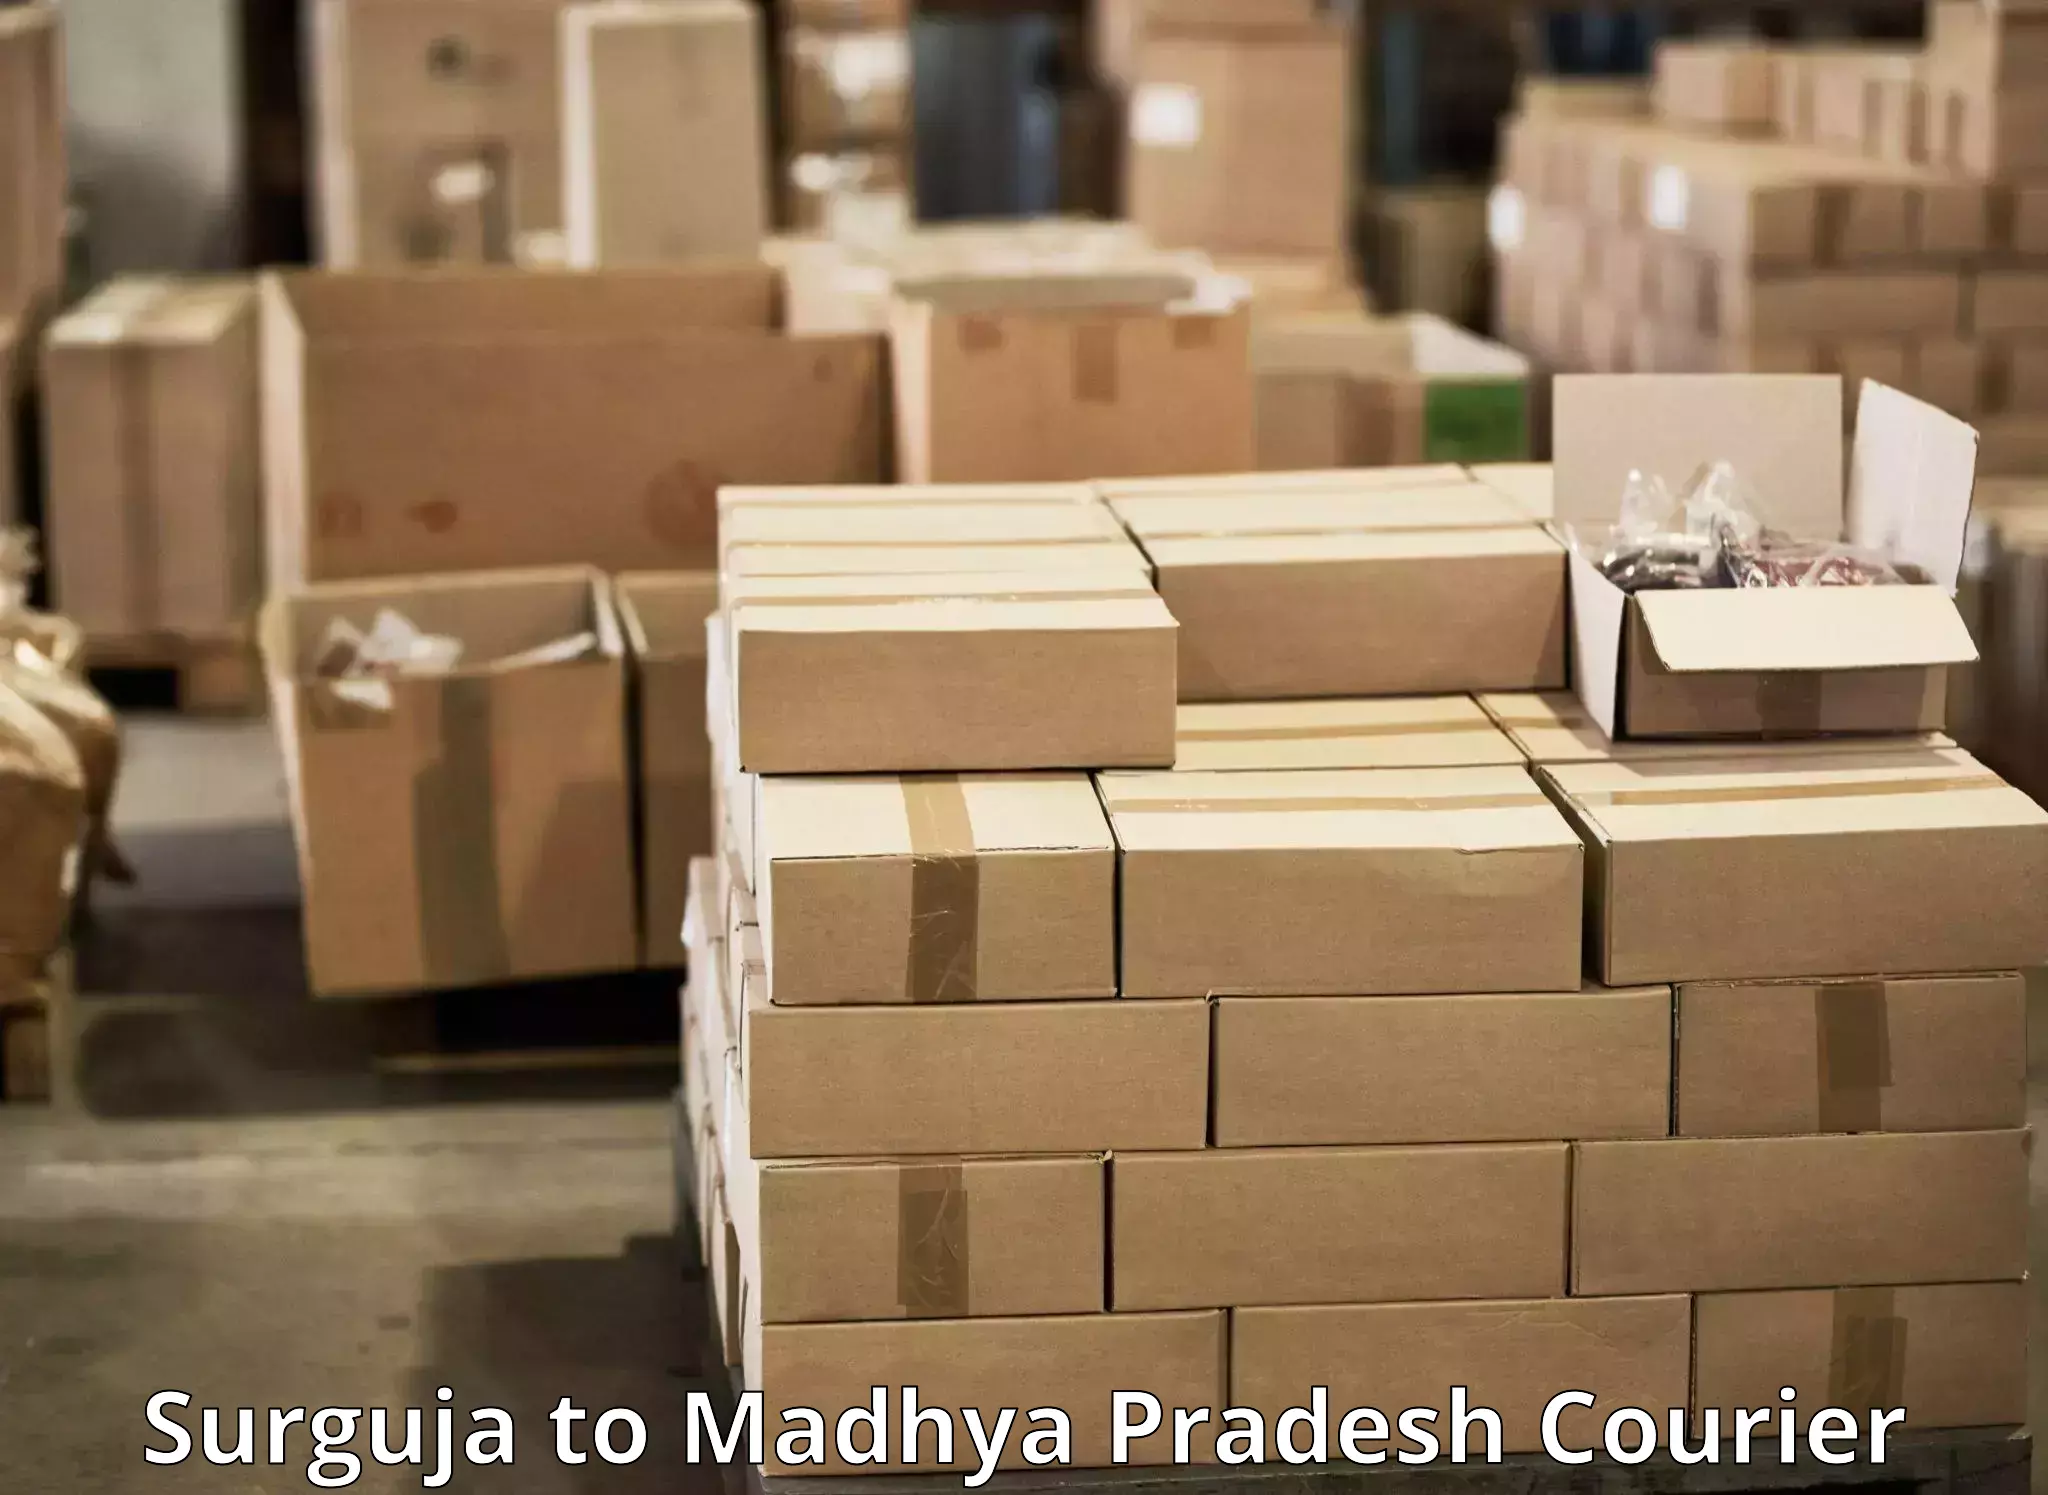 Courier service efficiency Surguja to Sheopur